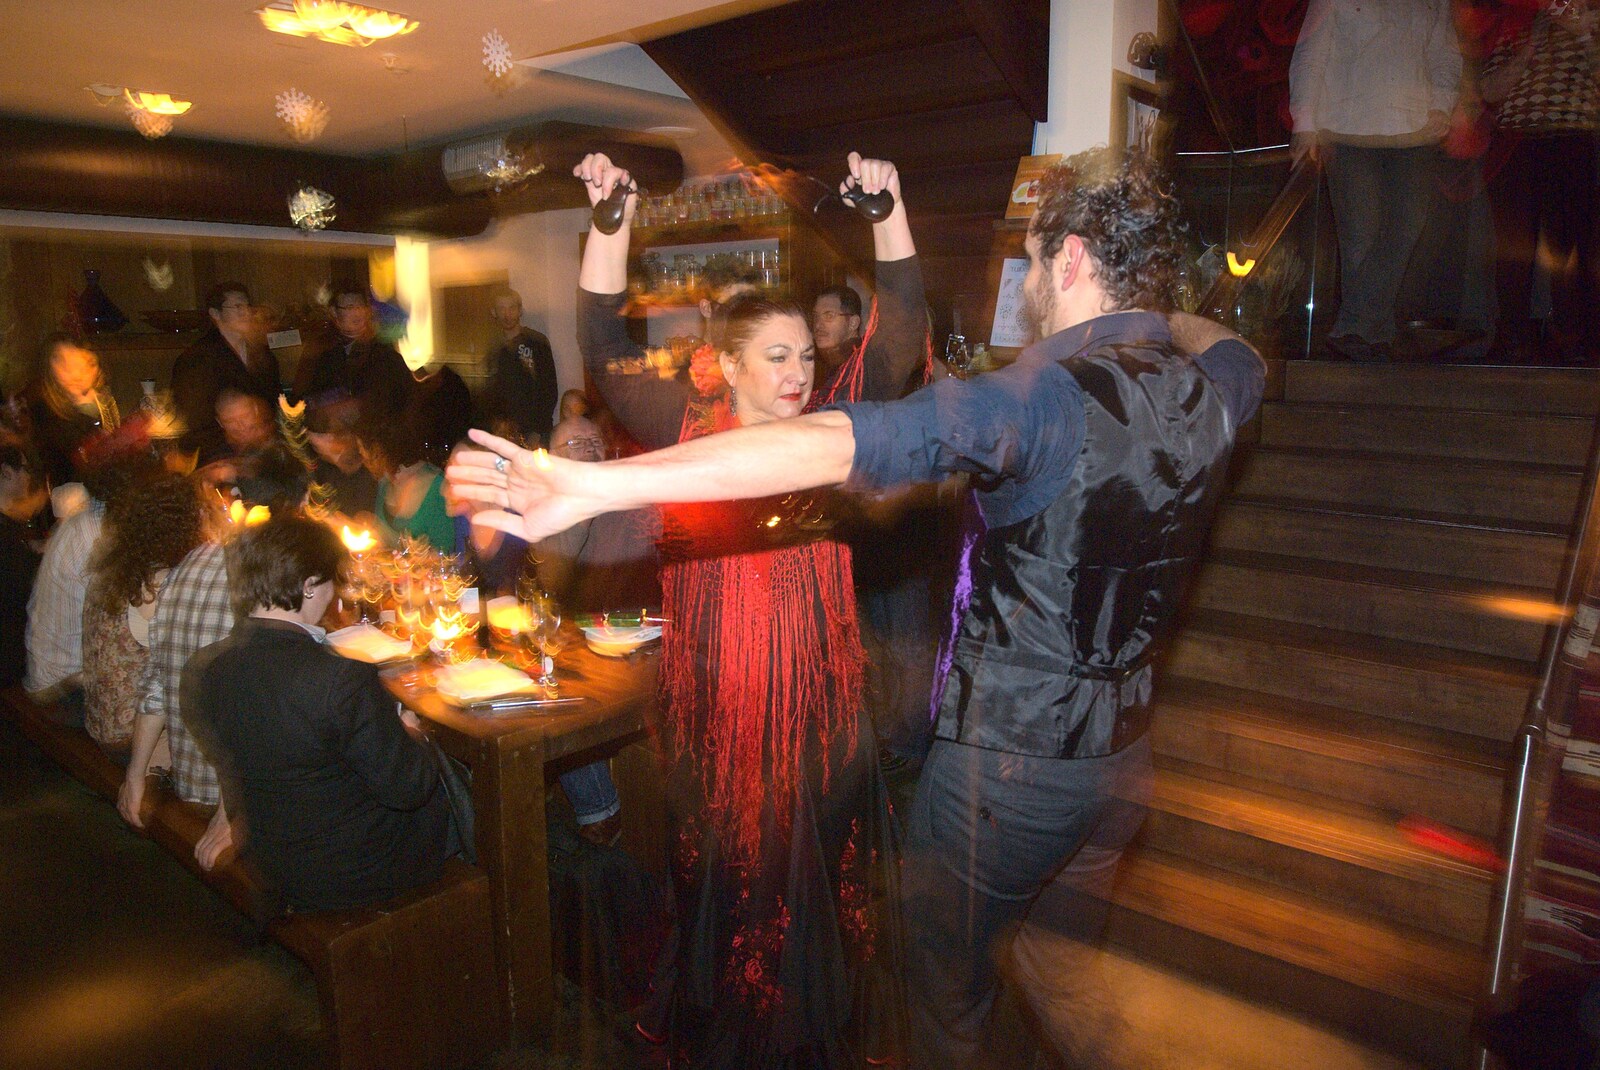 The Flamenco dancers get in the zone from A TouchType Christmas, Southwark, London - 15th December 2011